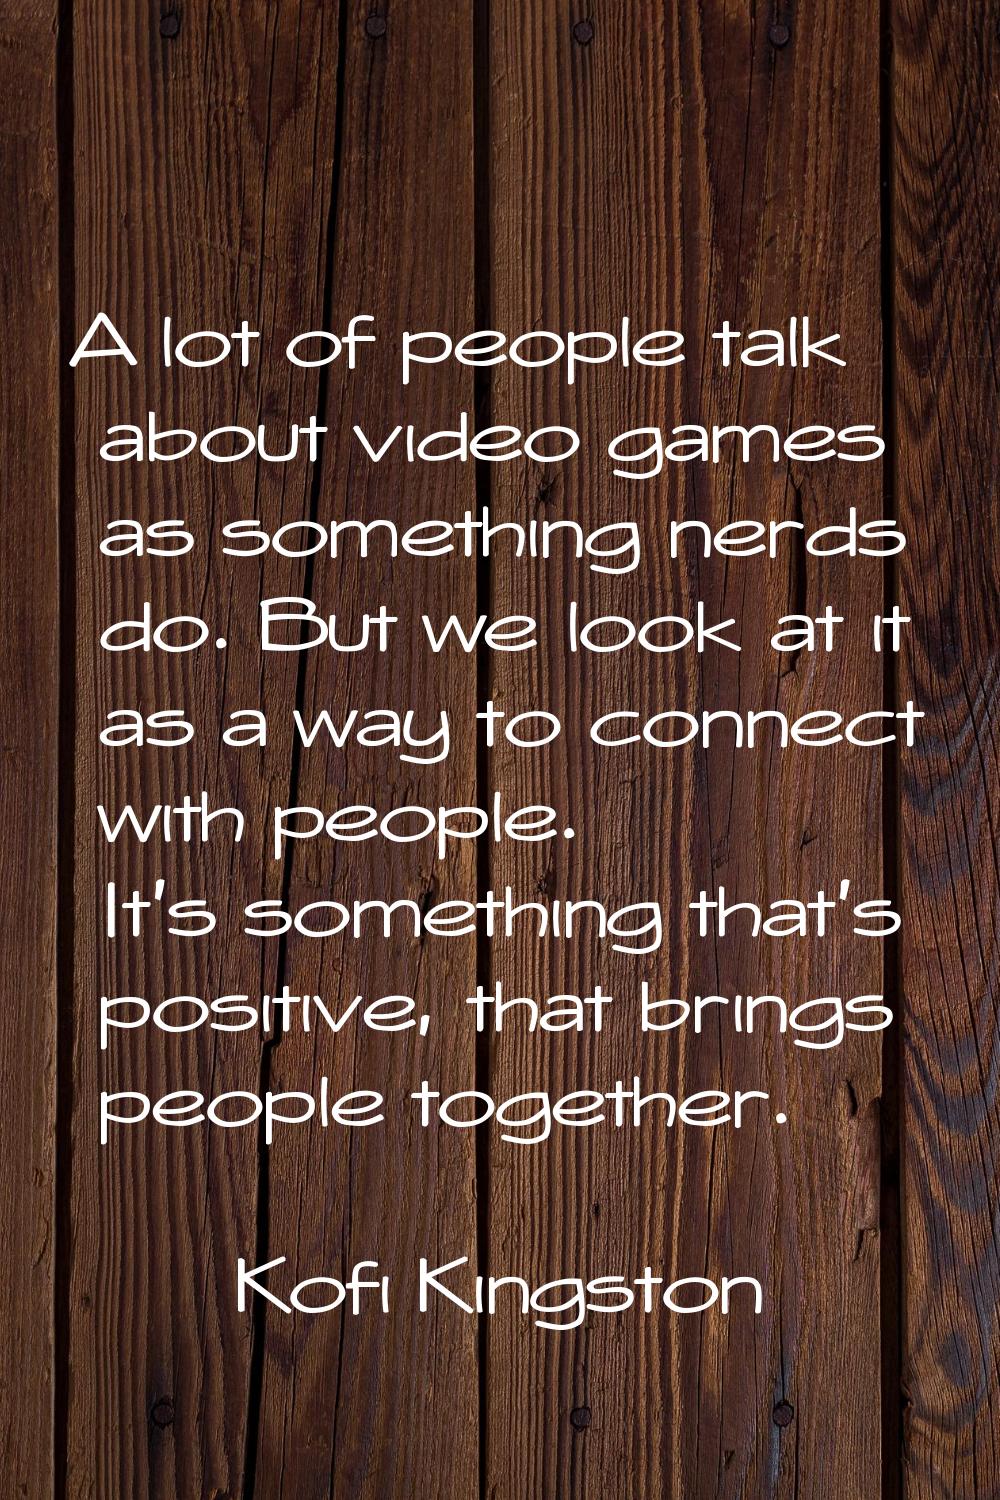 A lot of people talk about video games as something nerds do. But we look at it as a way to connect